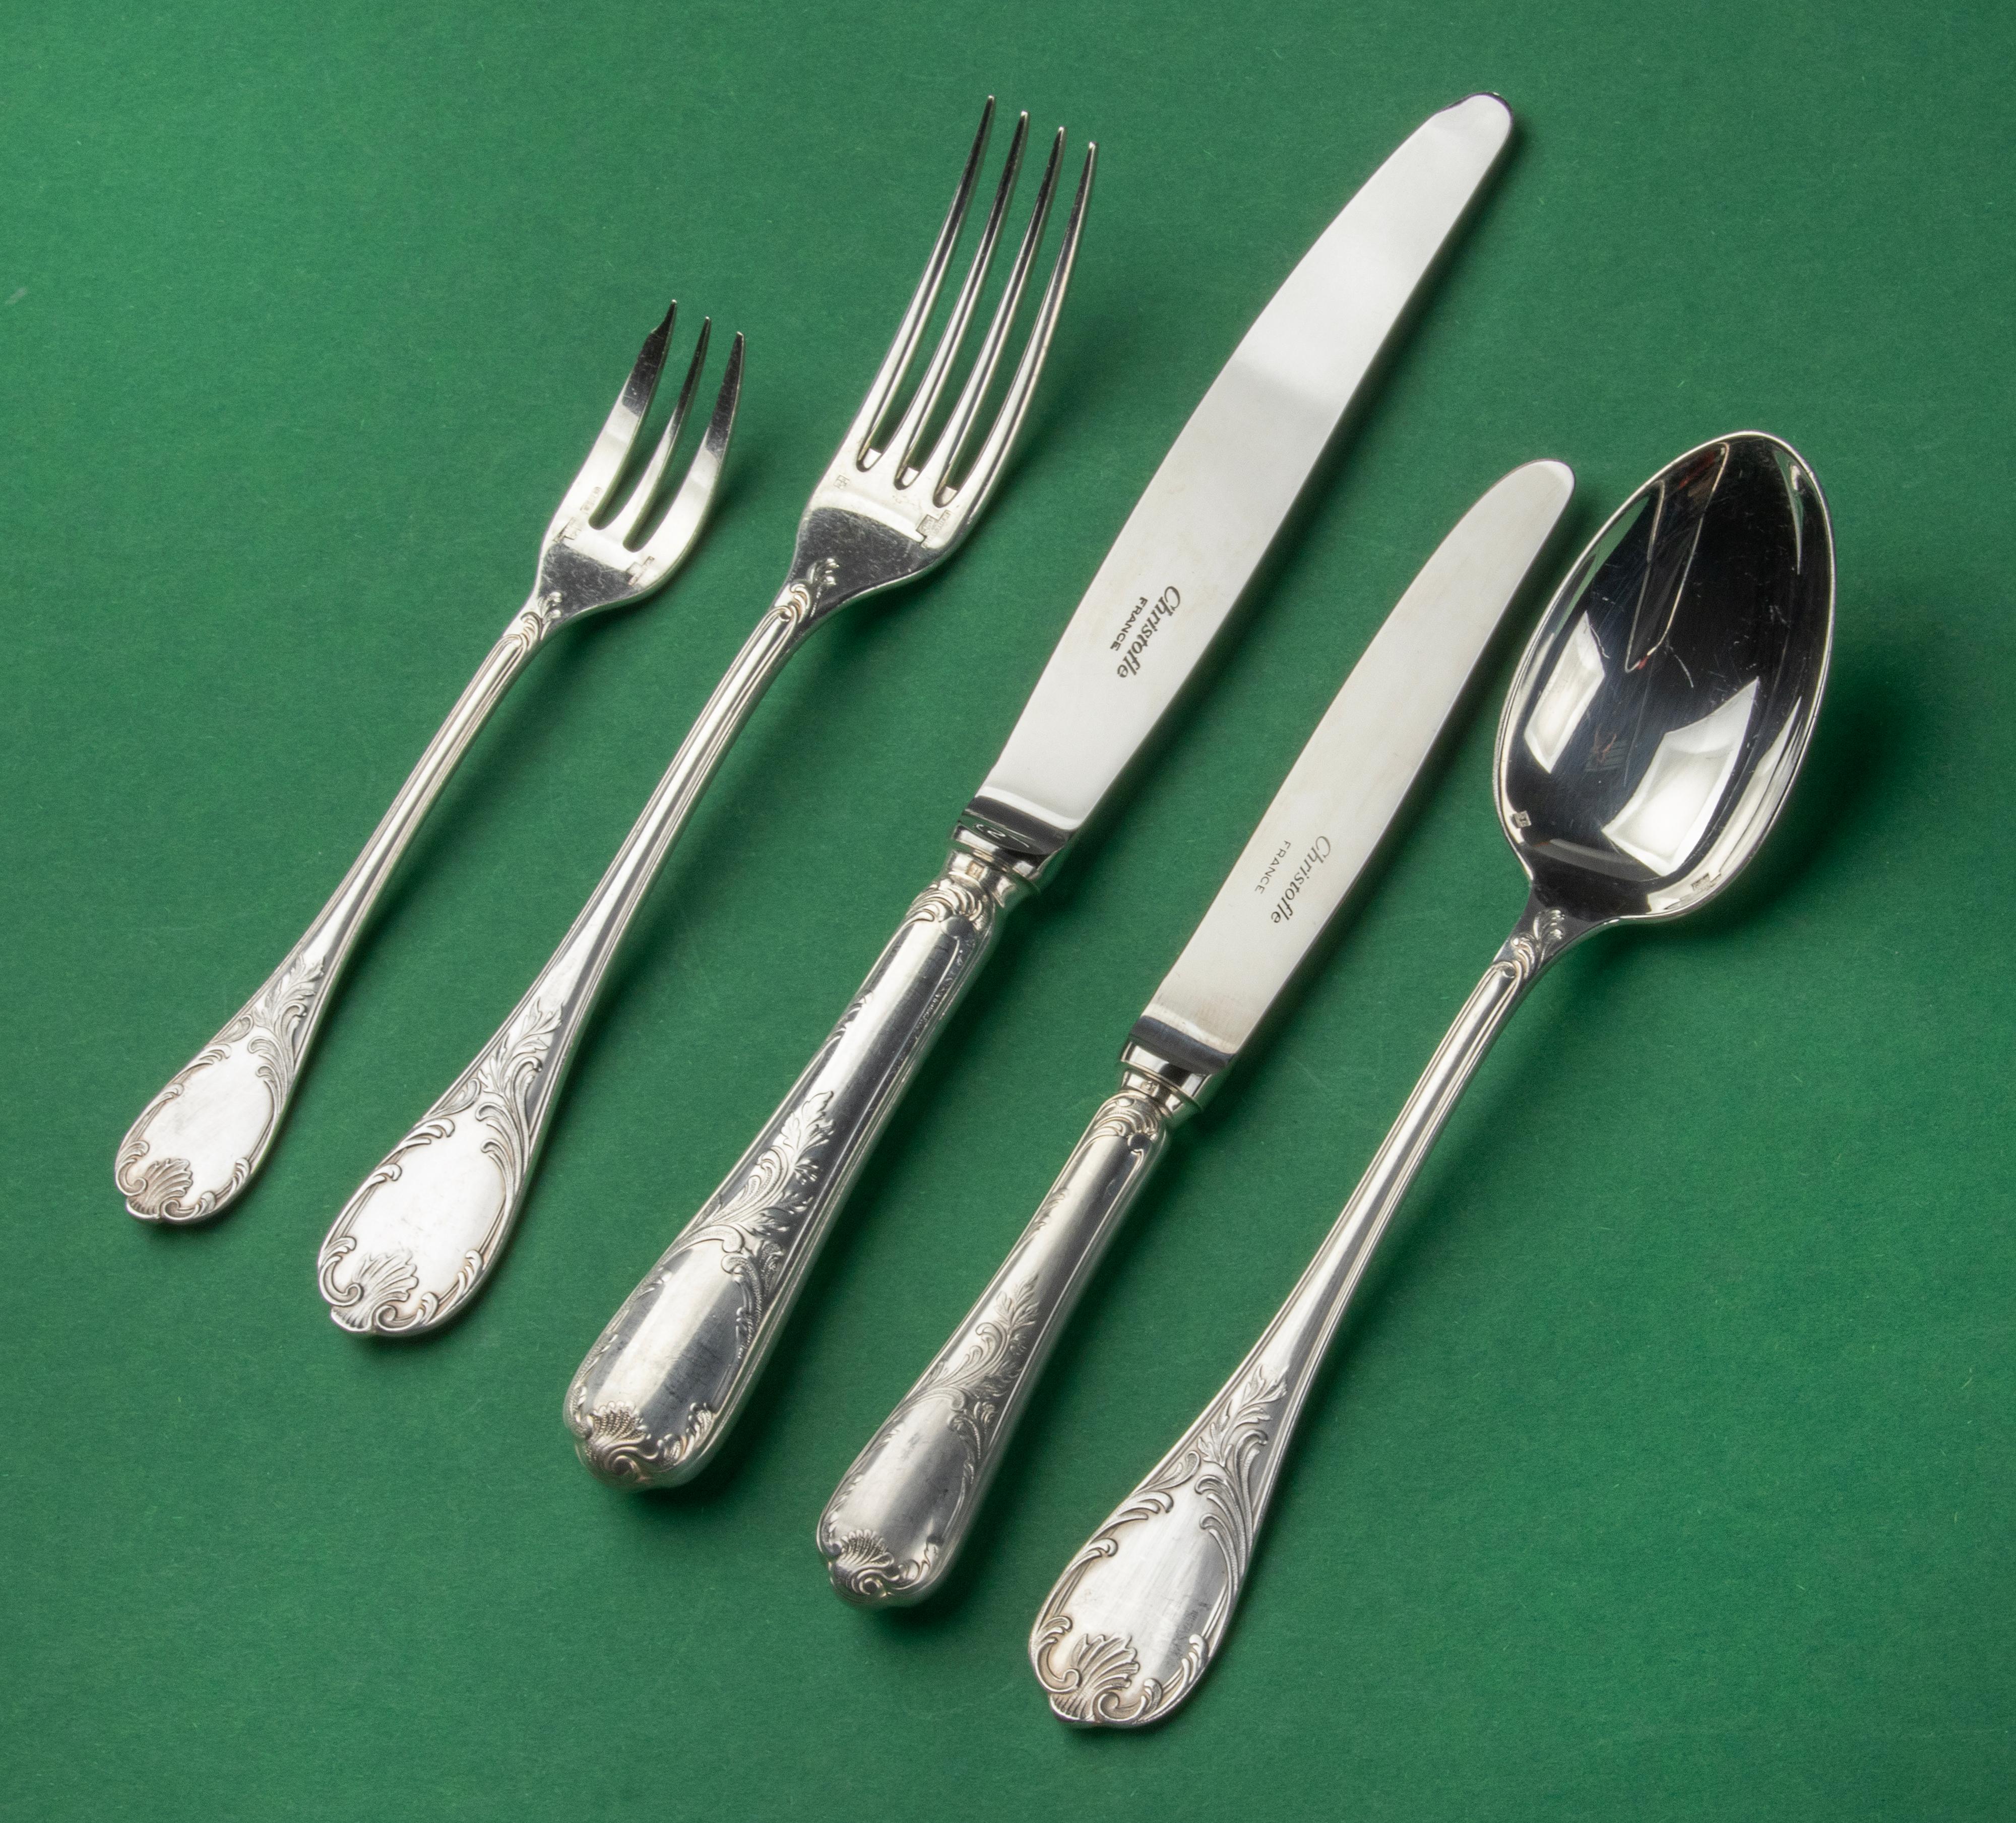 Beautiful set of silver plated flatware made by the French brand Christofle. The name is the model is Marly. An elegant and timeless design that is still in production these days. This set is for 8 people: 
8 table knives 25 cm
8 table spoons 21 cm